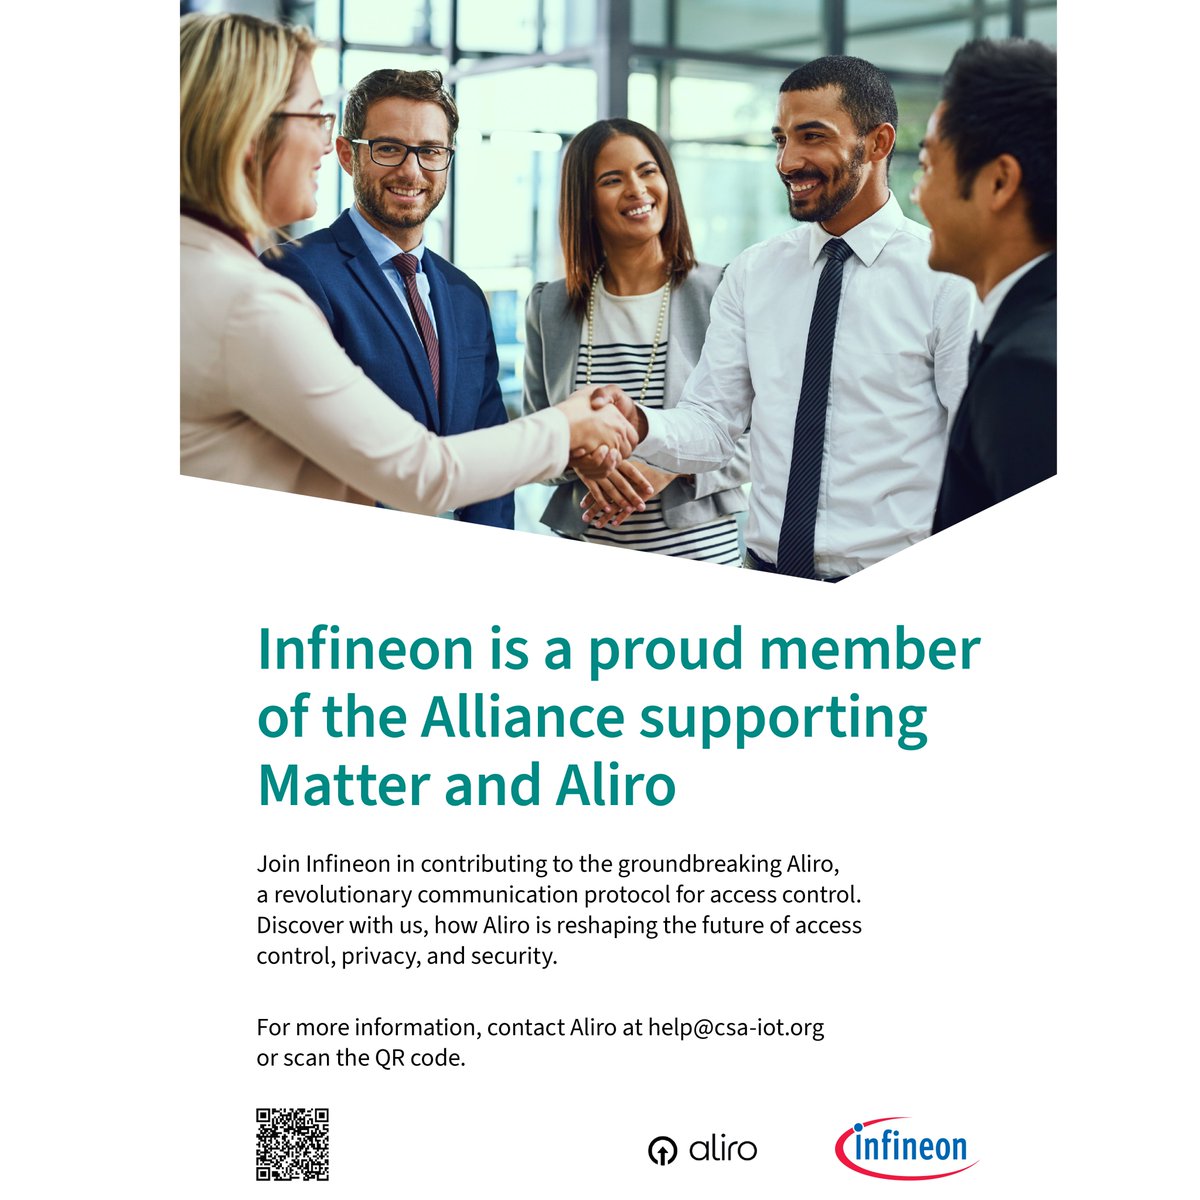 Visit Alliance Member @Infineon at Embedded World, April 9th-11th in Nuremberg to learn how they are contributing to #Aliro, a revolutionary communication protocol for access control. Location is Booth 4A-138. bit.ly/49Qd9Dv #csaiot